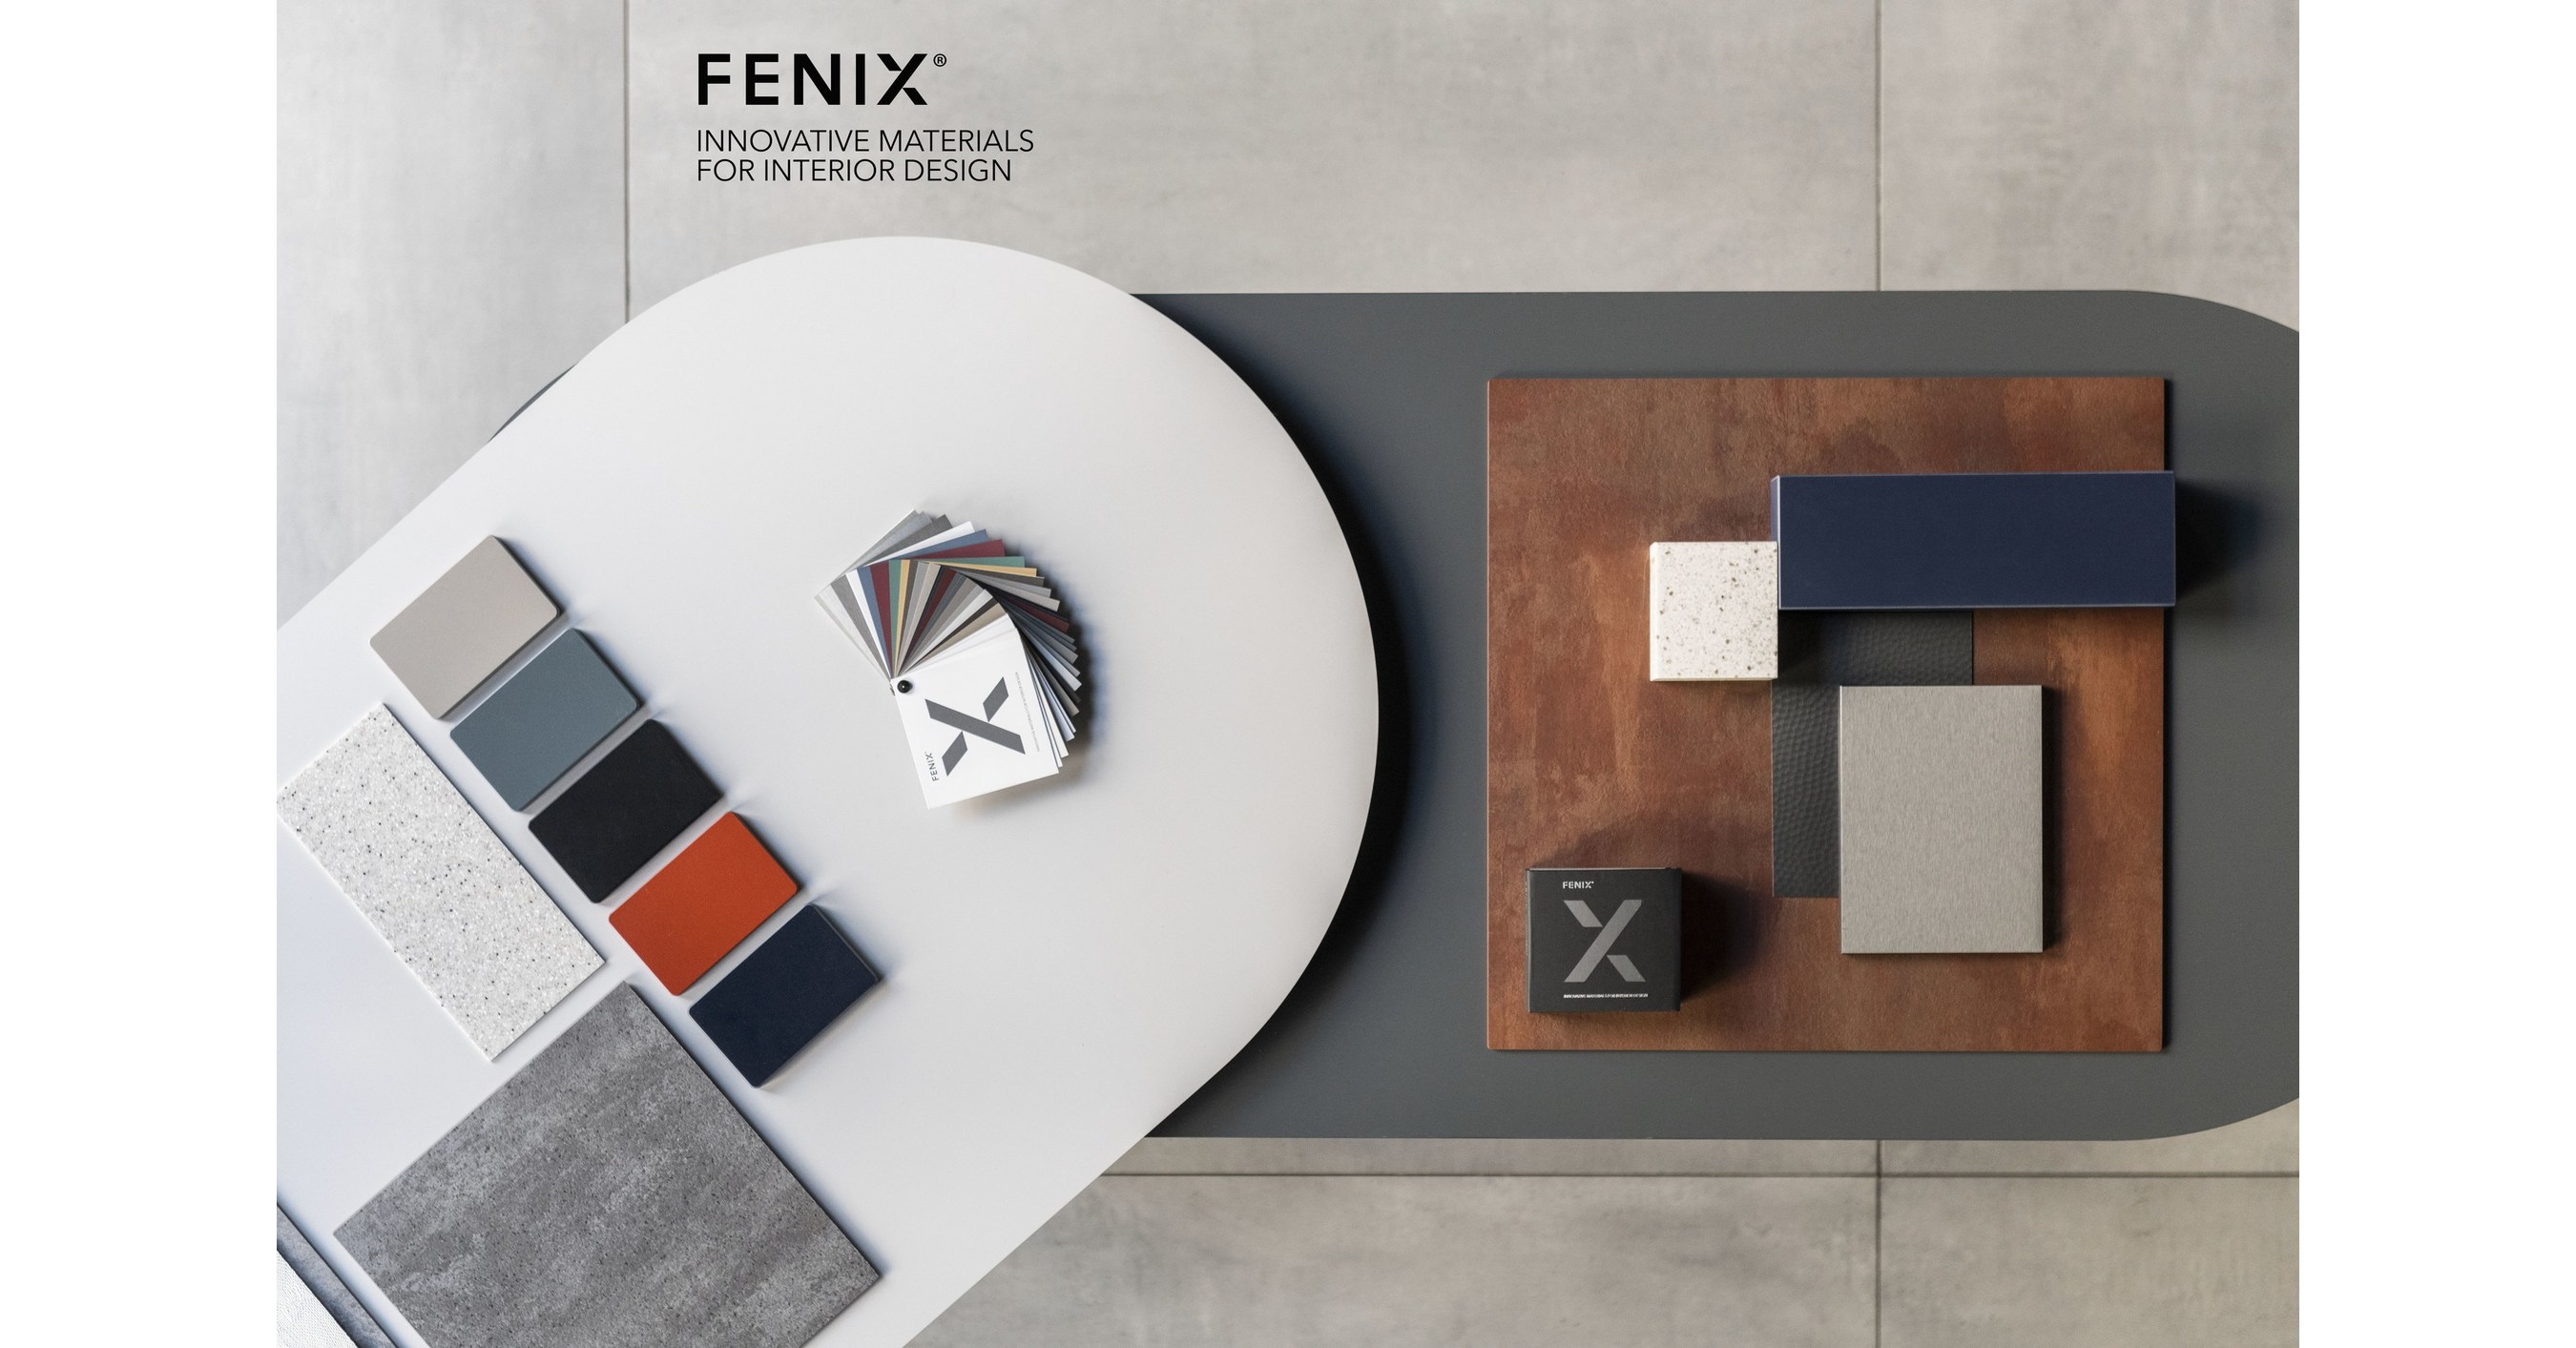 Surfaces with a view  FENIX materials and solutions for interior